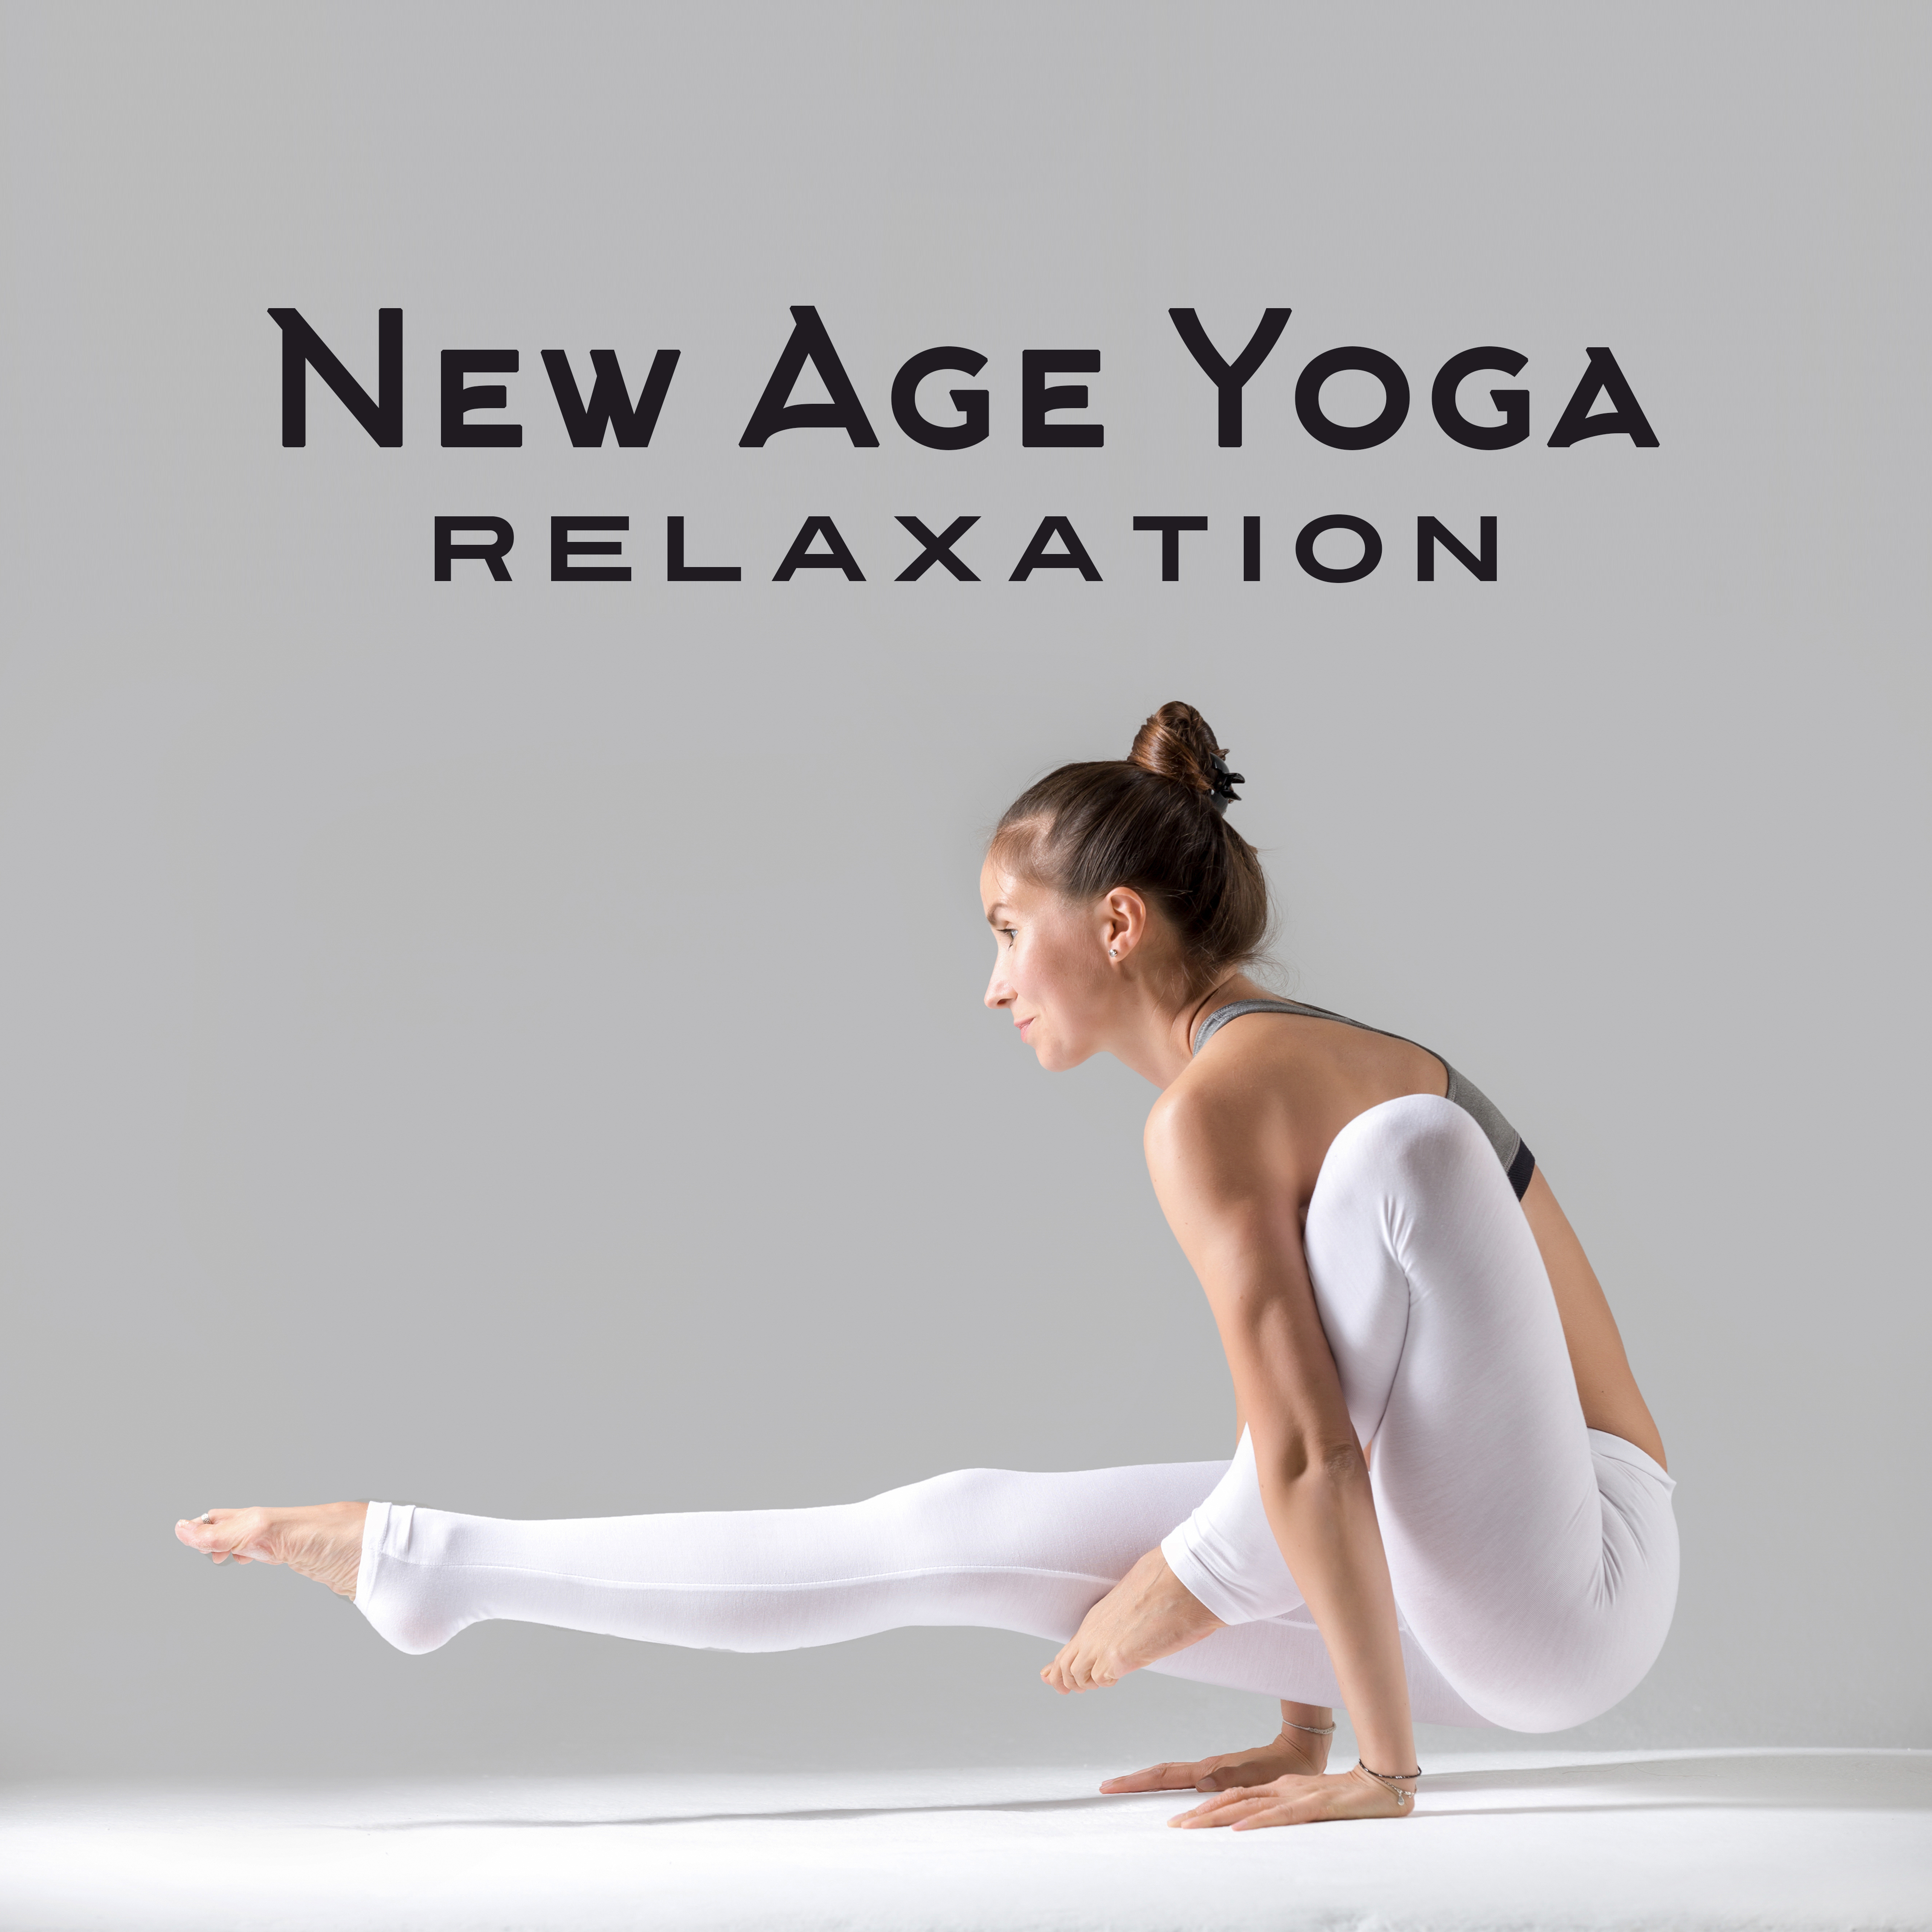 New Age Yoga Relaxation